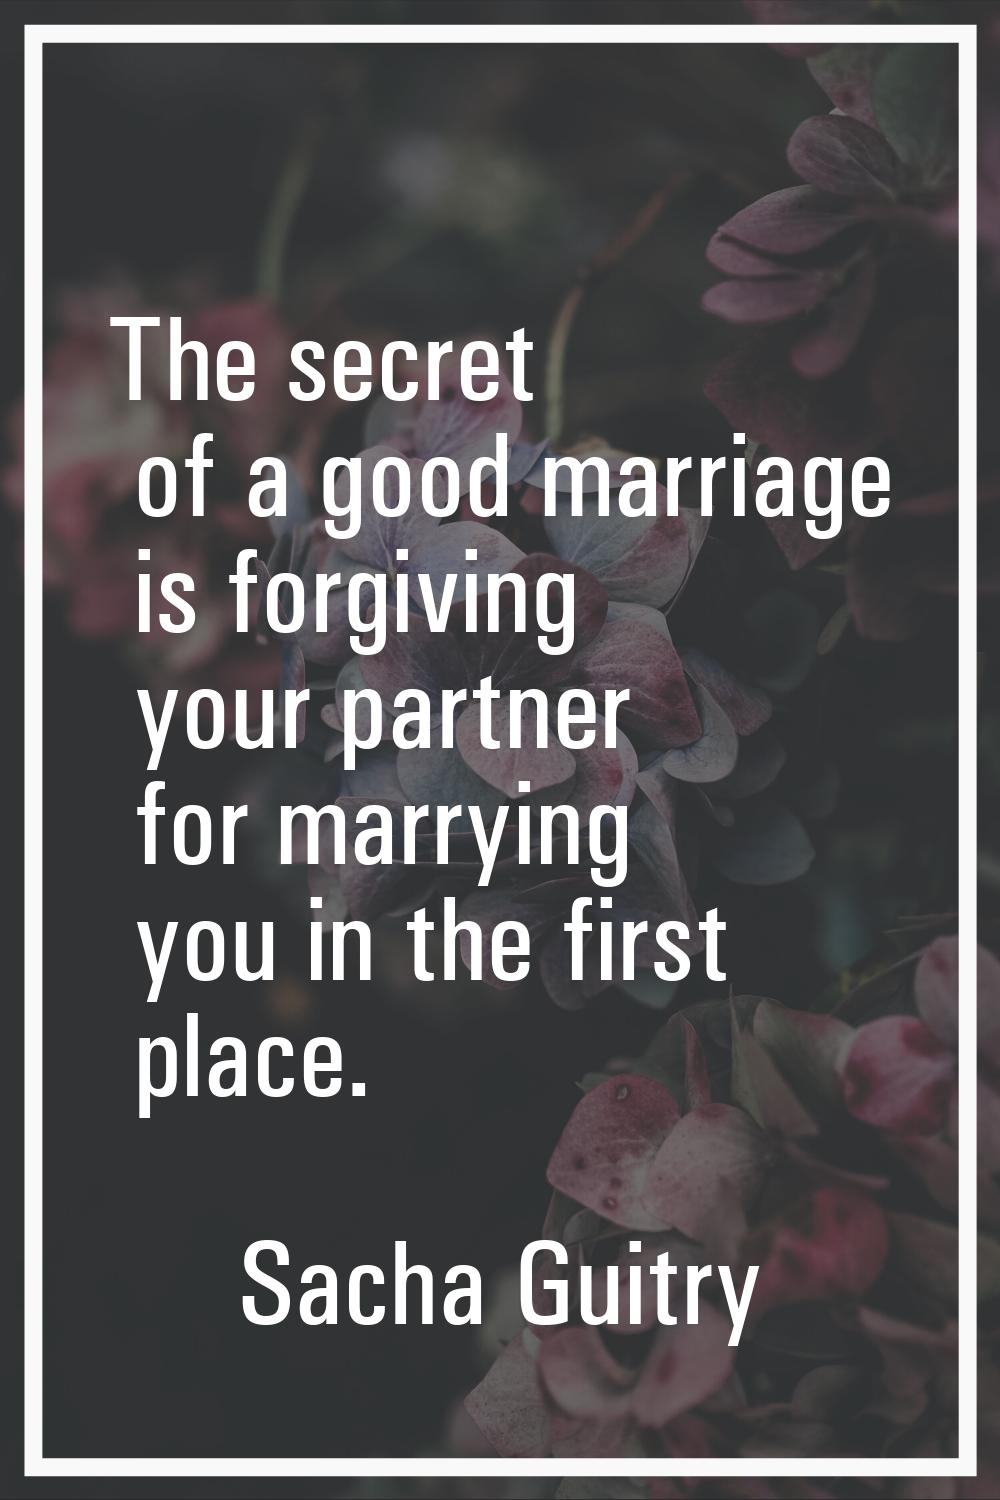 The secret of a good marriage is forgiving your partner for marrying you in the first place.